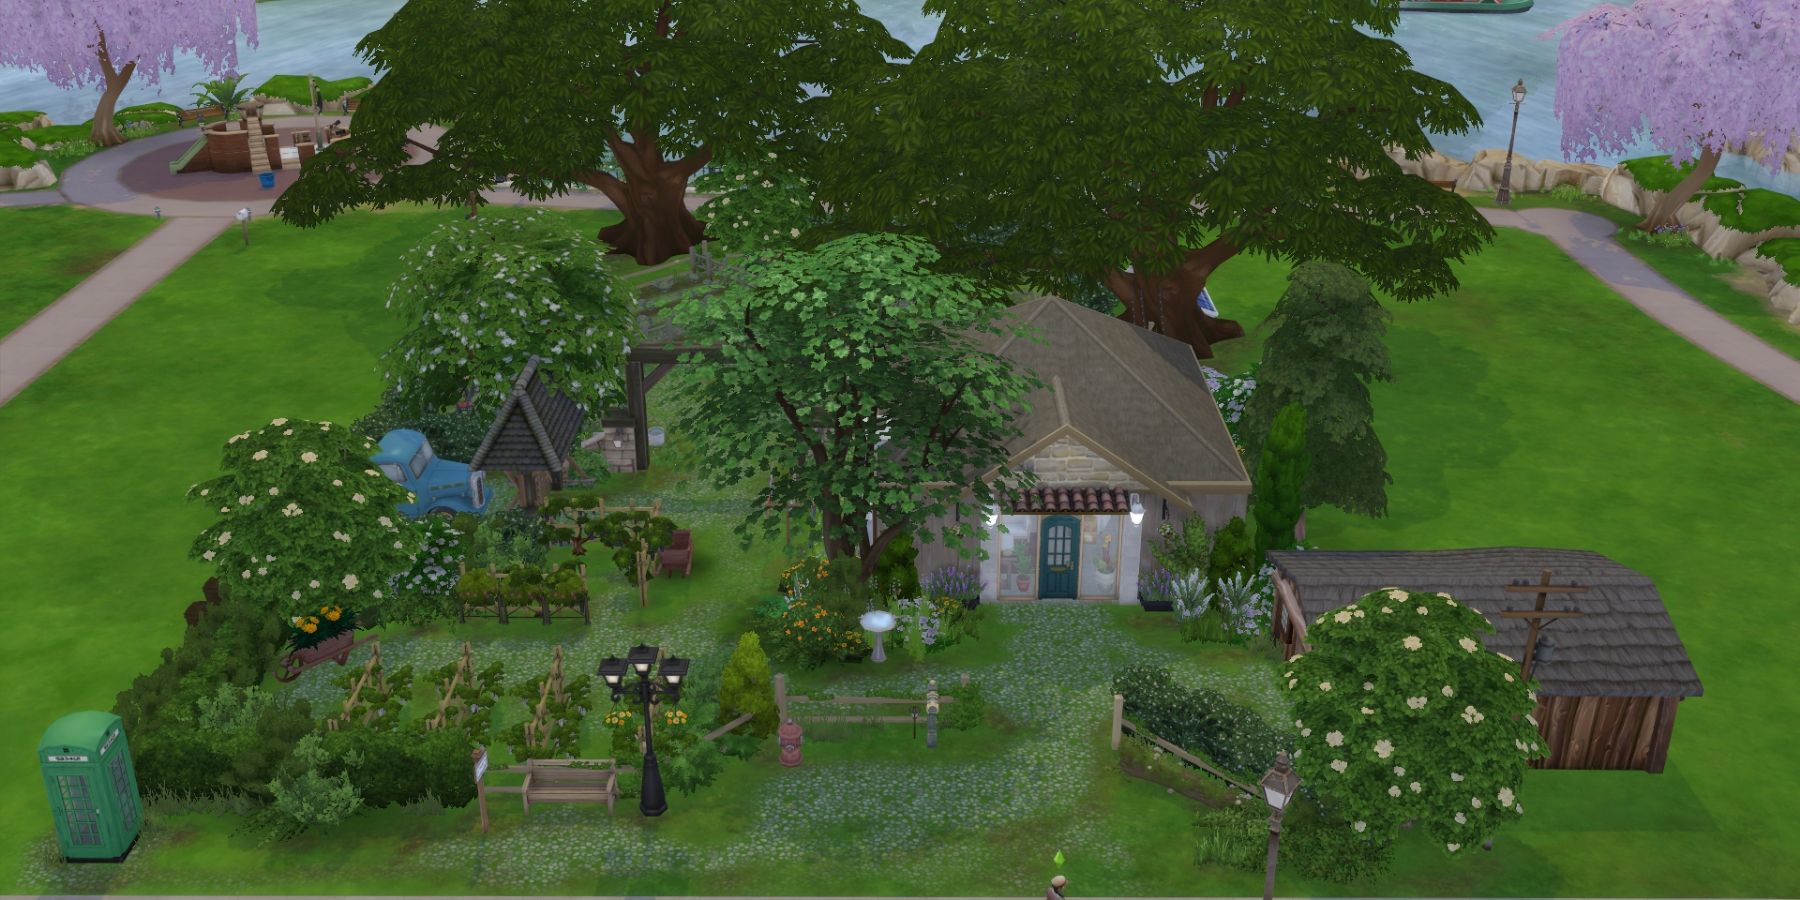 2K Starter Home in the sims 4